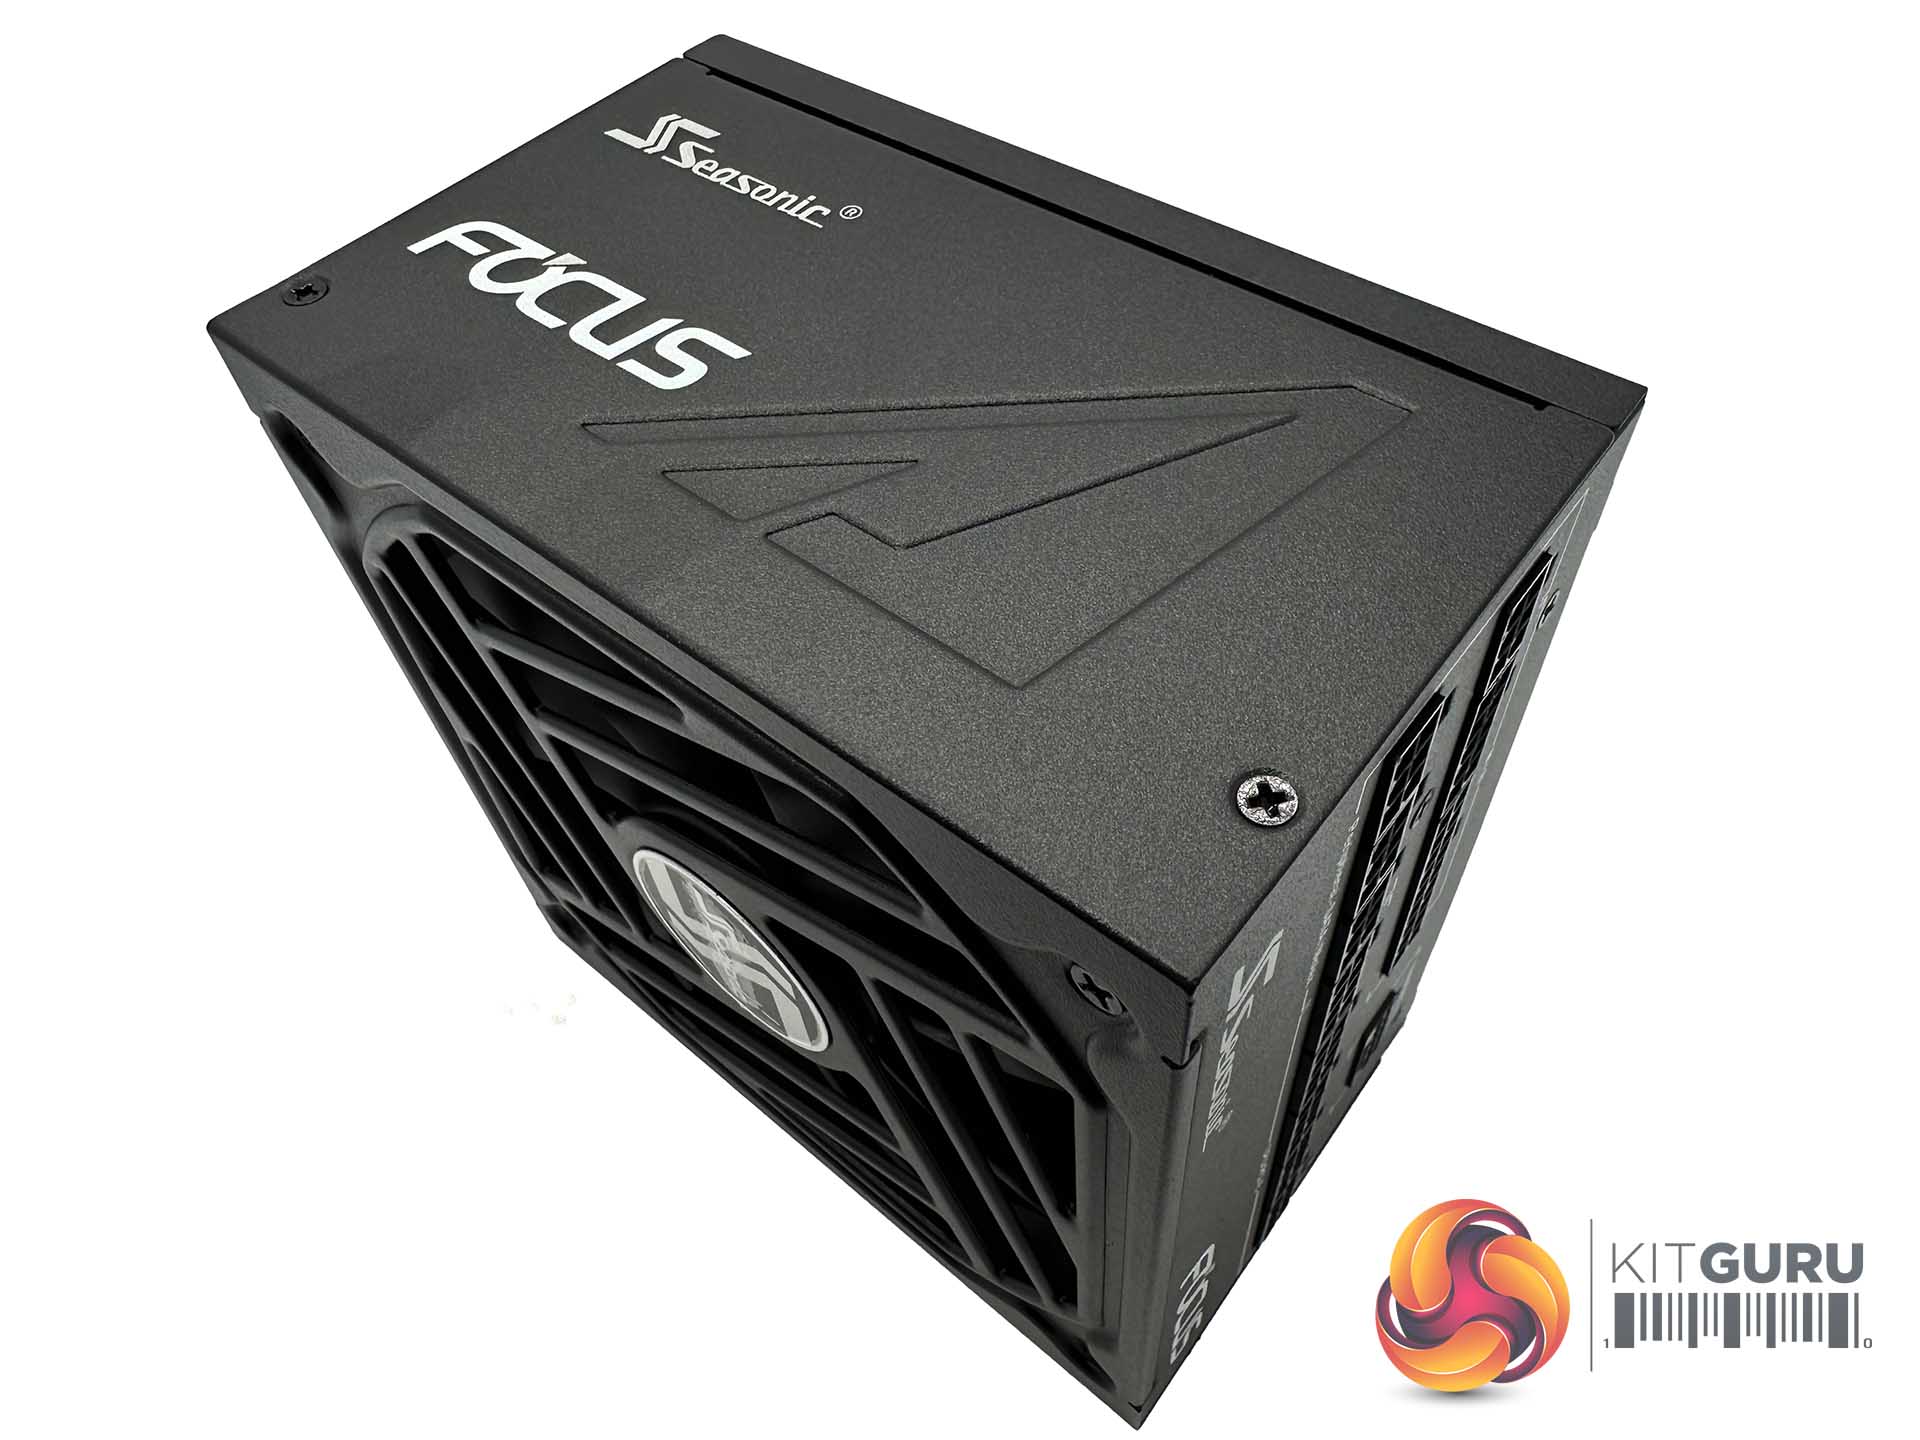 Seasonic FOCUS GX-1000, 1000W 80+ Gold, Full-Modular, Fan Control in  Fanless, Silent, and Cooling Mode, Perfect Power Supply for Gaming and  Various